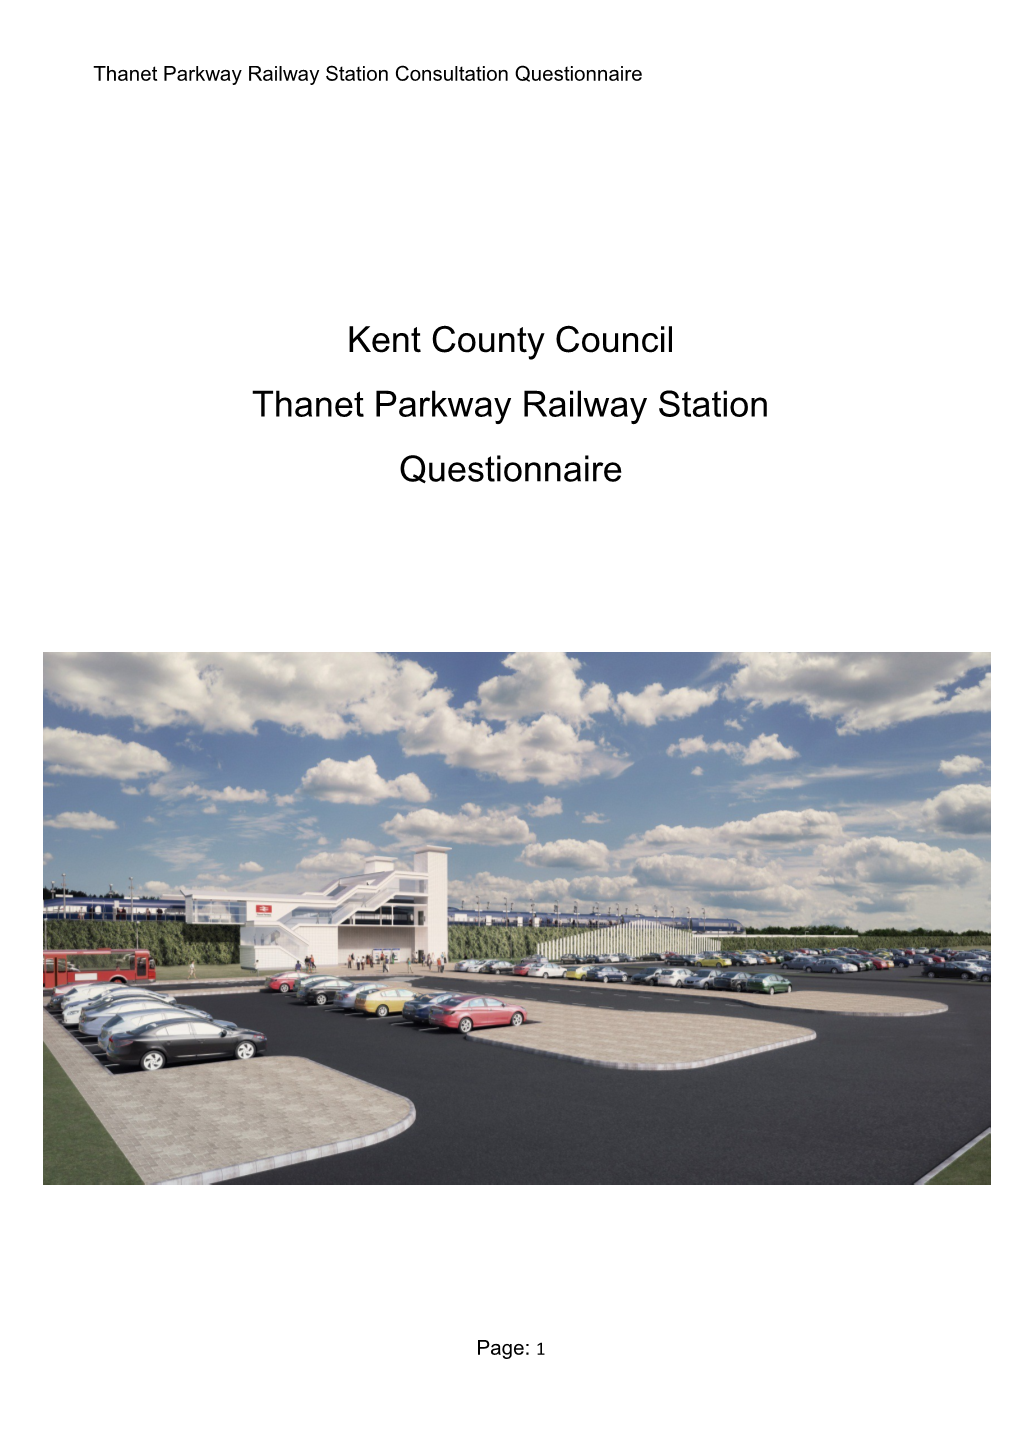 Thanet Parkway Railway Station Consultation Questionnaire